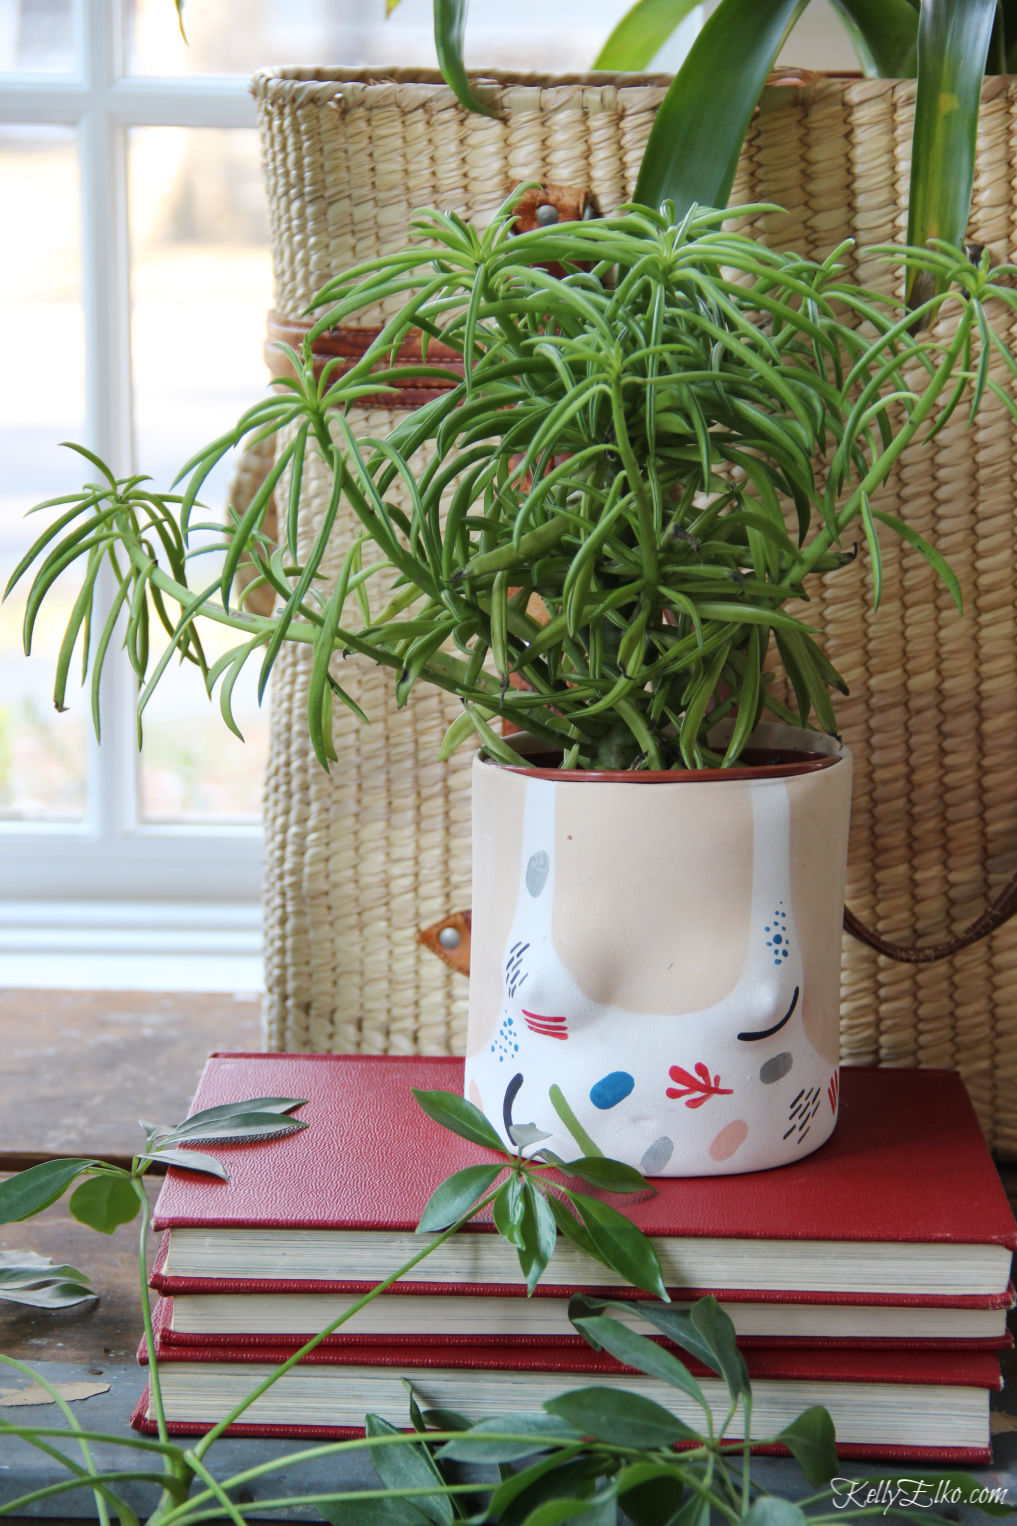 How cute is this little bathing suit planter and the succulent that looks like hair kellyelko.com #plants #houseplants #sunroom #jungalow #jungalowstyle #bohostyle #bohodecor #interiordesign #planters #vintagedecor #plantlady #eclecticdecor #kellyelko #succulent 